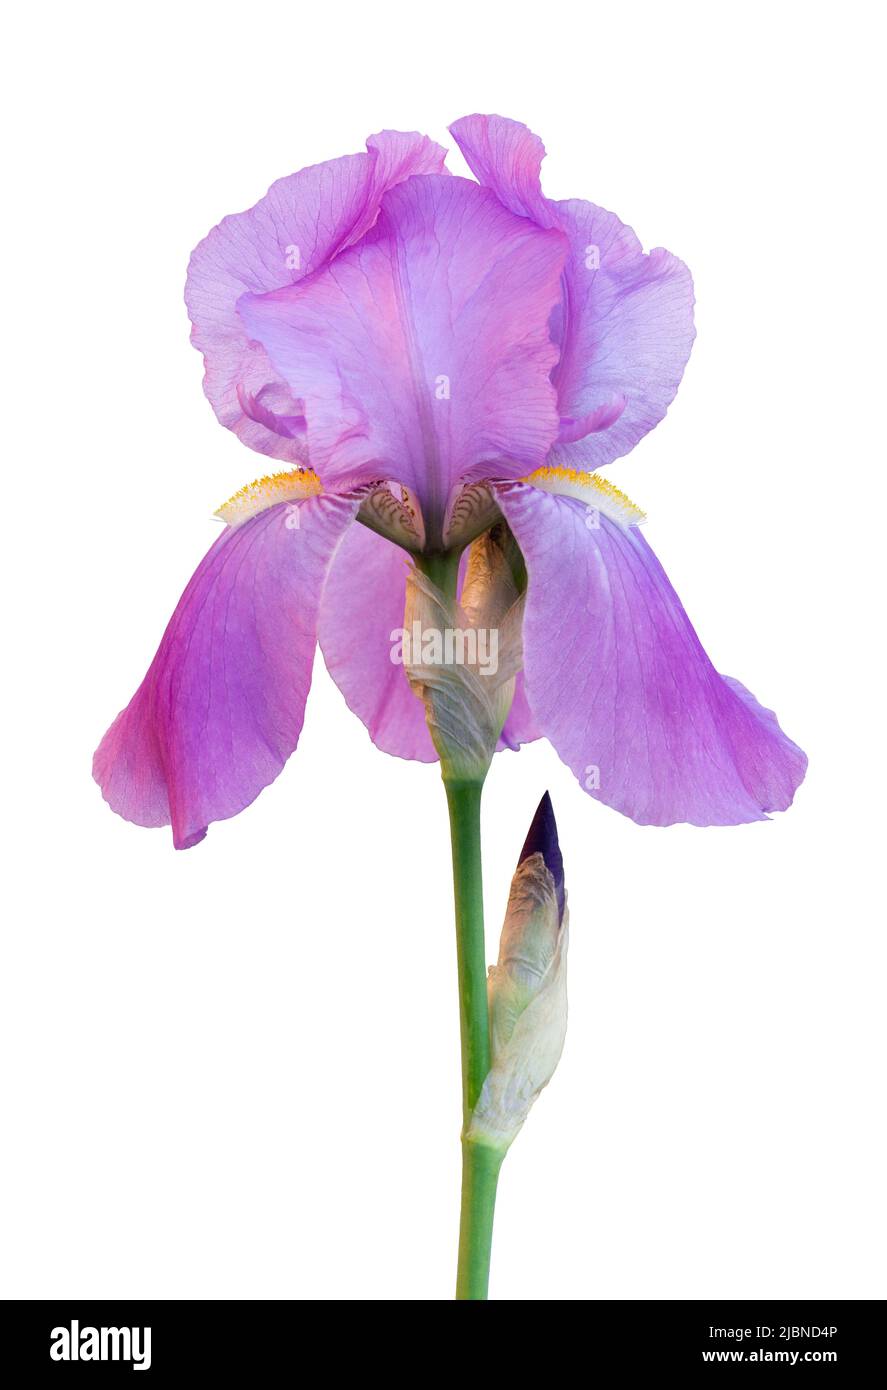 violet iris flower isolated over white background Stock Photo